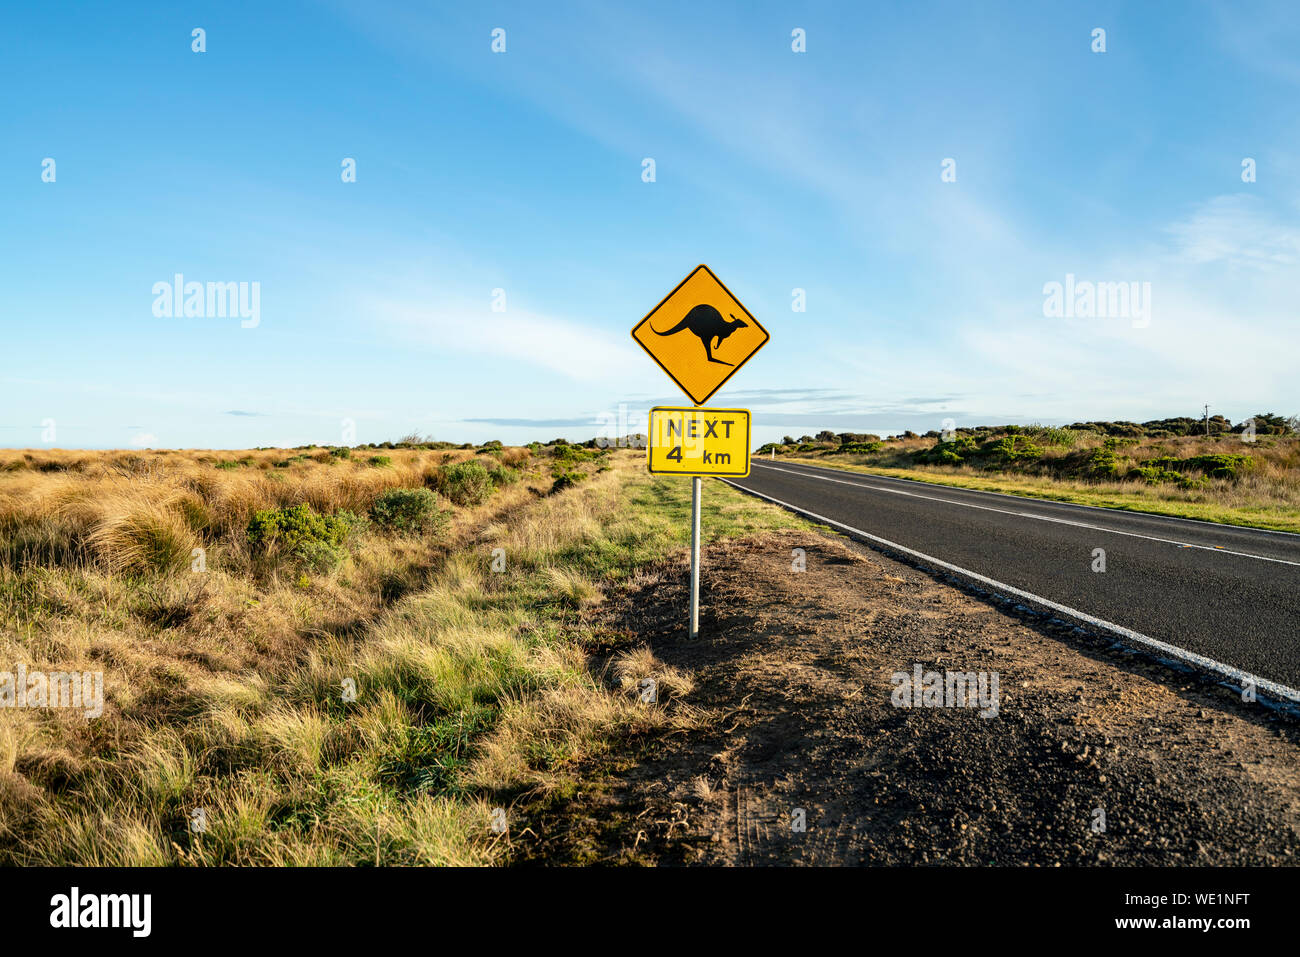 An iconic kangaroo road sign against a blue sky on the Great Ocean Road in Victoria, Australia Stock Photo